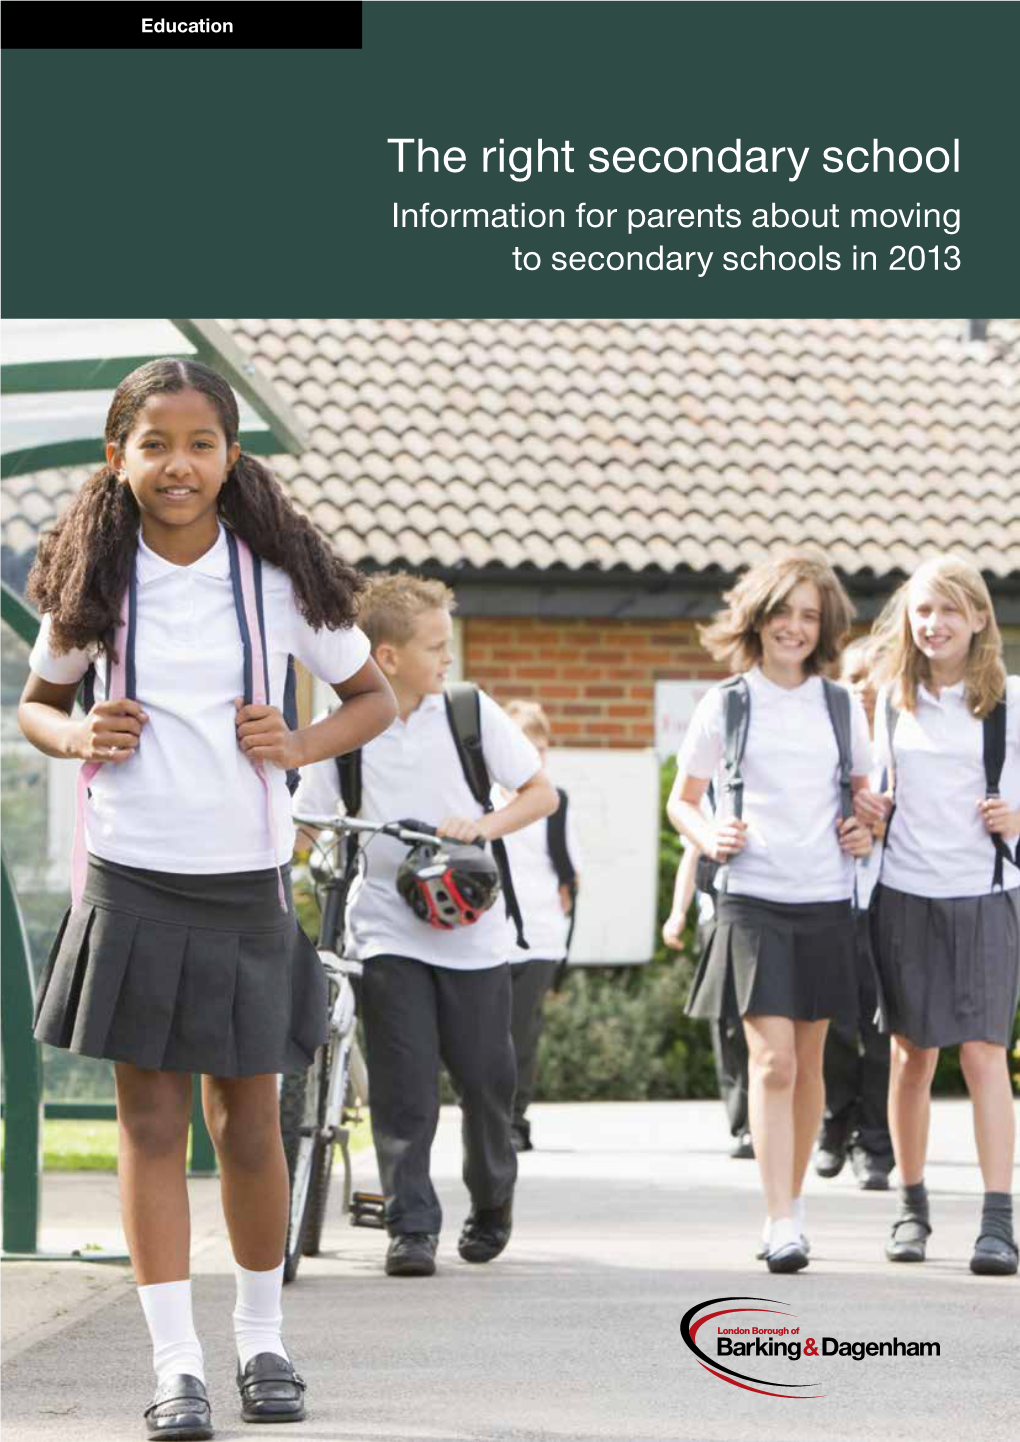 The Right Secondary School Information for Parents About Moving to Secondary Schools in 2013 the Closing Date for All Applications Is 31 October 2012